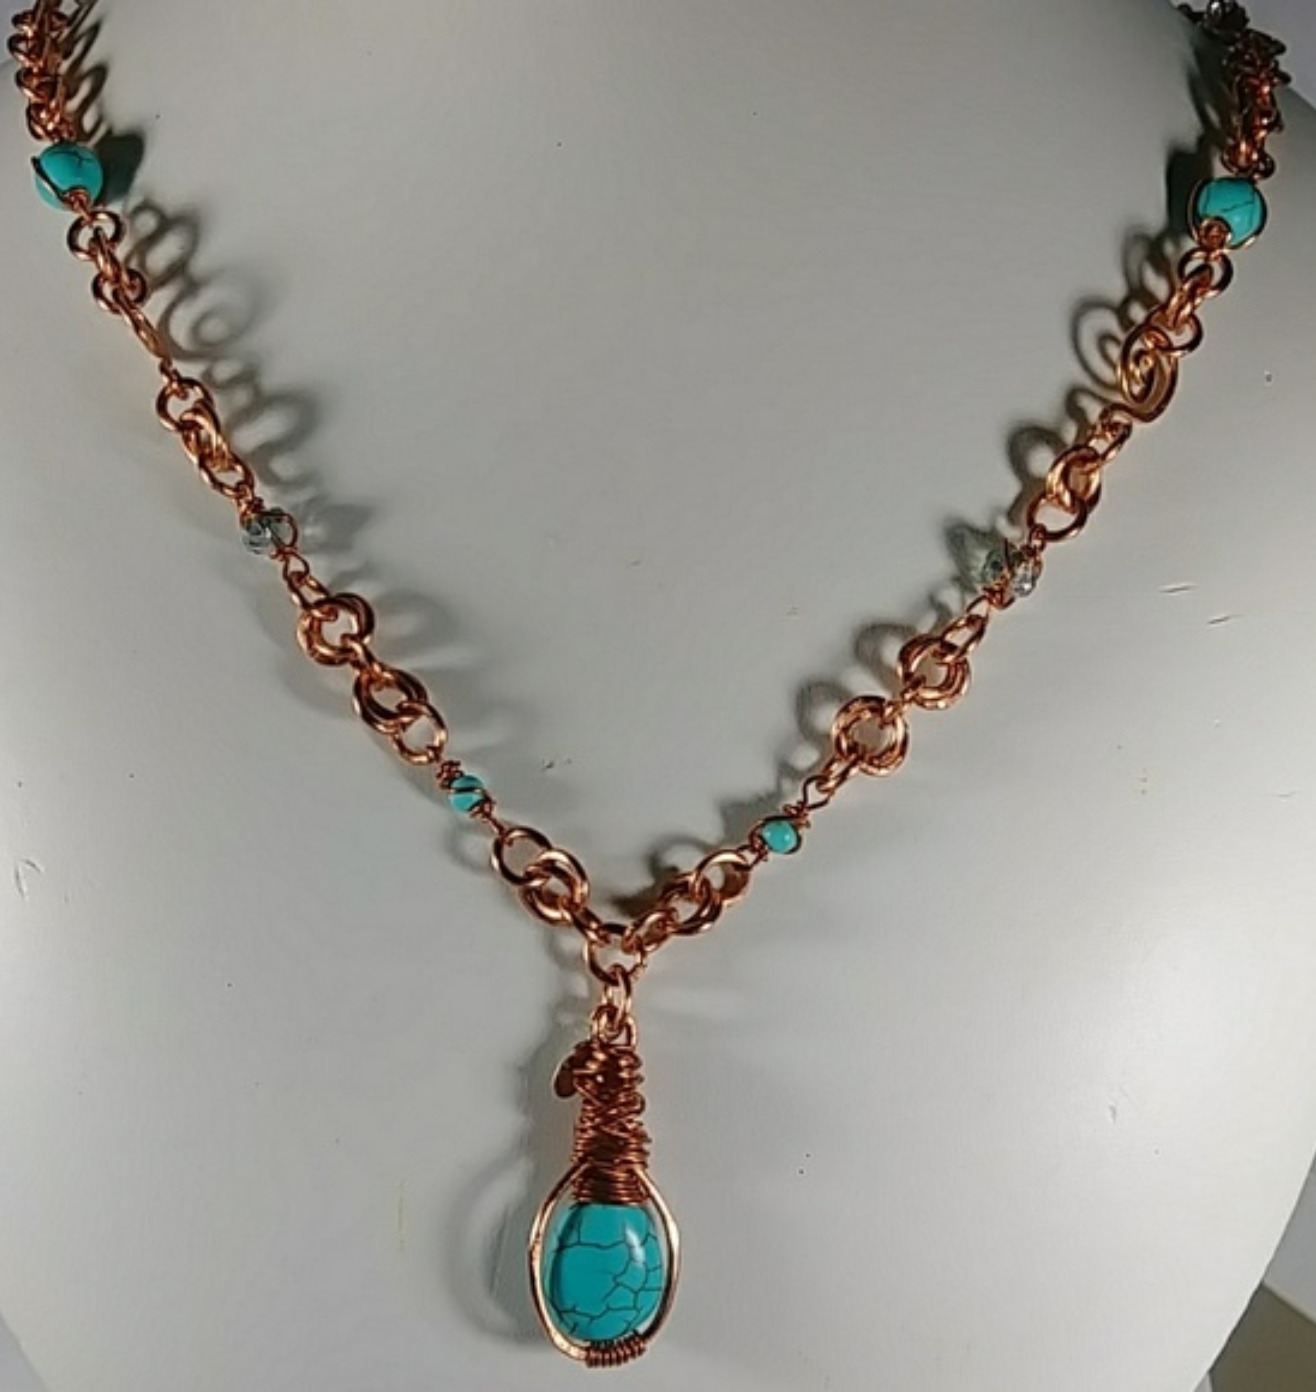 (304 -NCK) - Description: Copper Wire, Beads, Turquoise Howlite (Gemstones) , Faceted Glass Beads, Hook Closure  Dimension: 25 Inches (L)